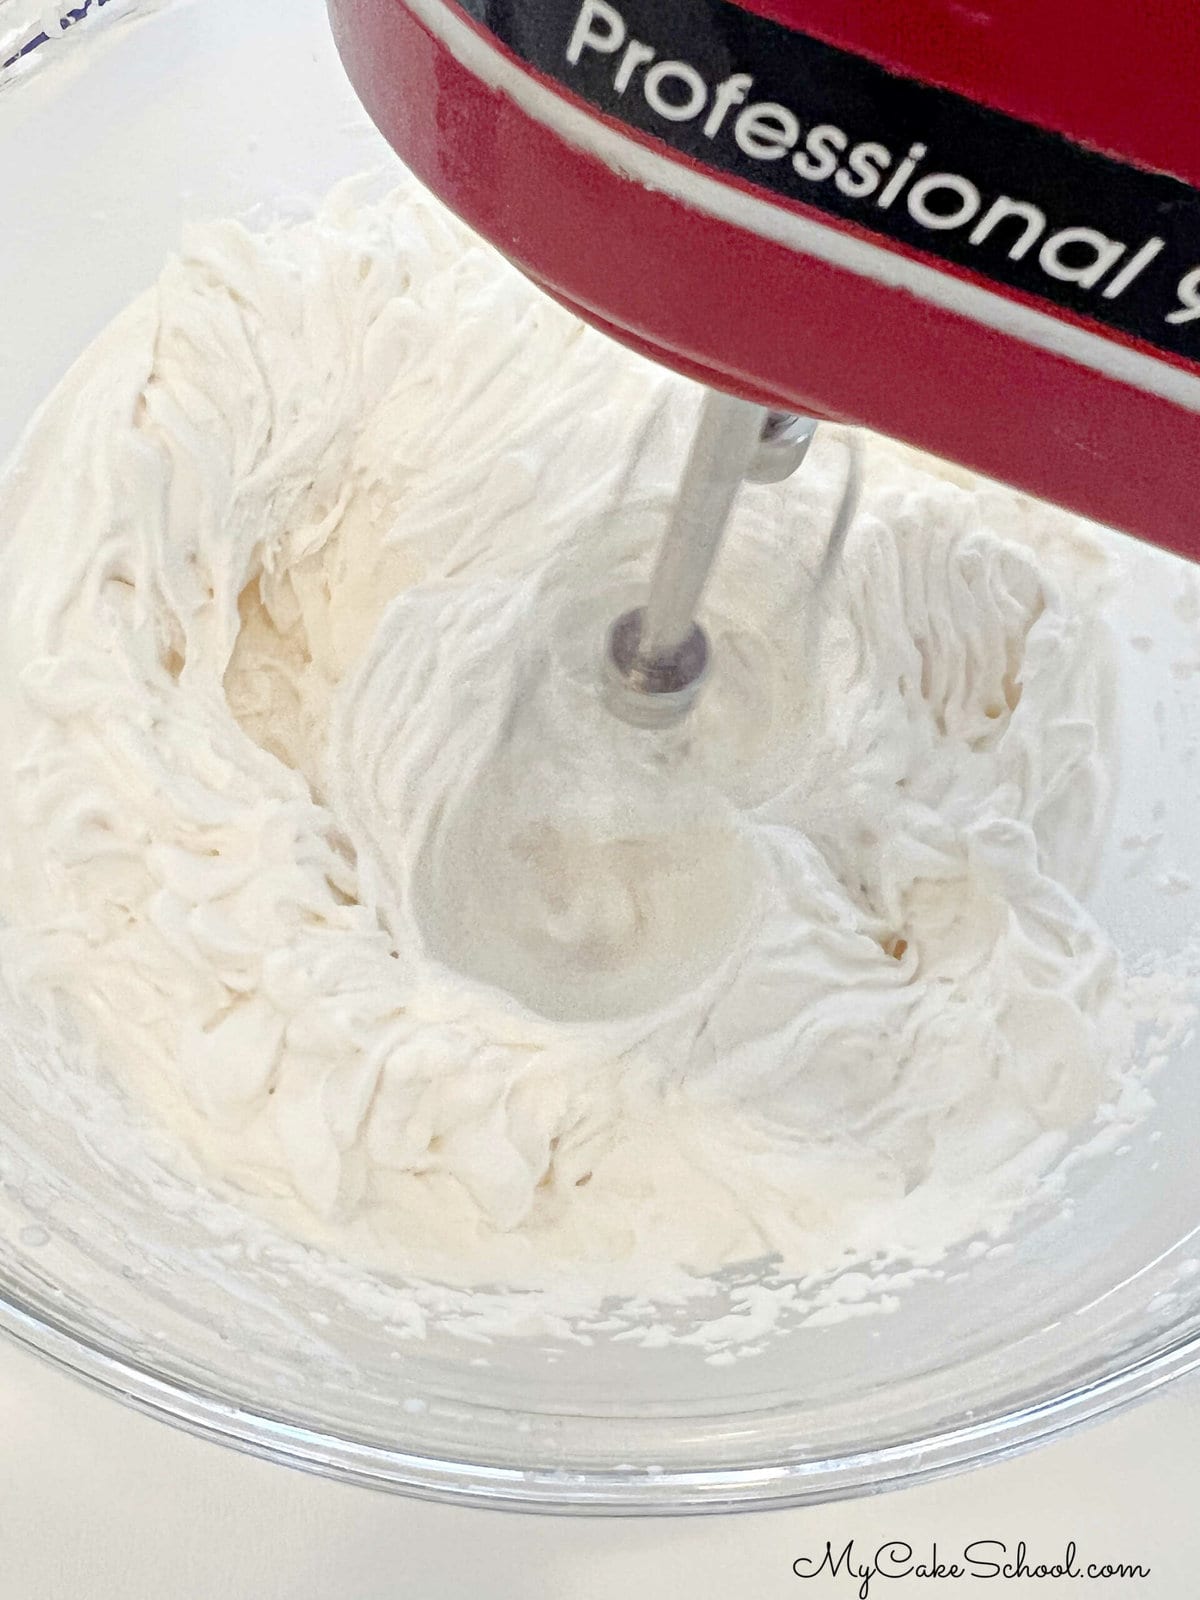 Whipping the Cream and Champagne with Electric Mixer